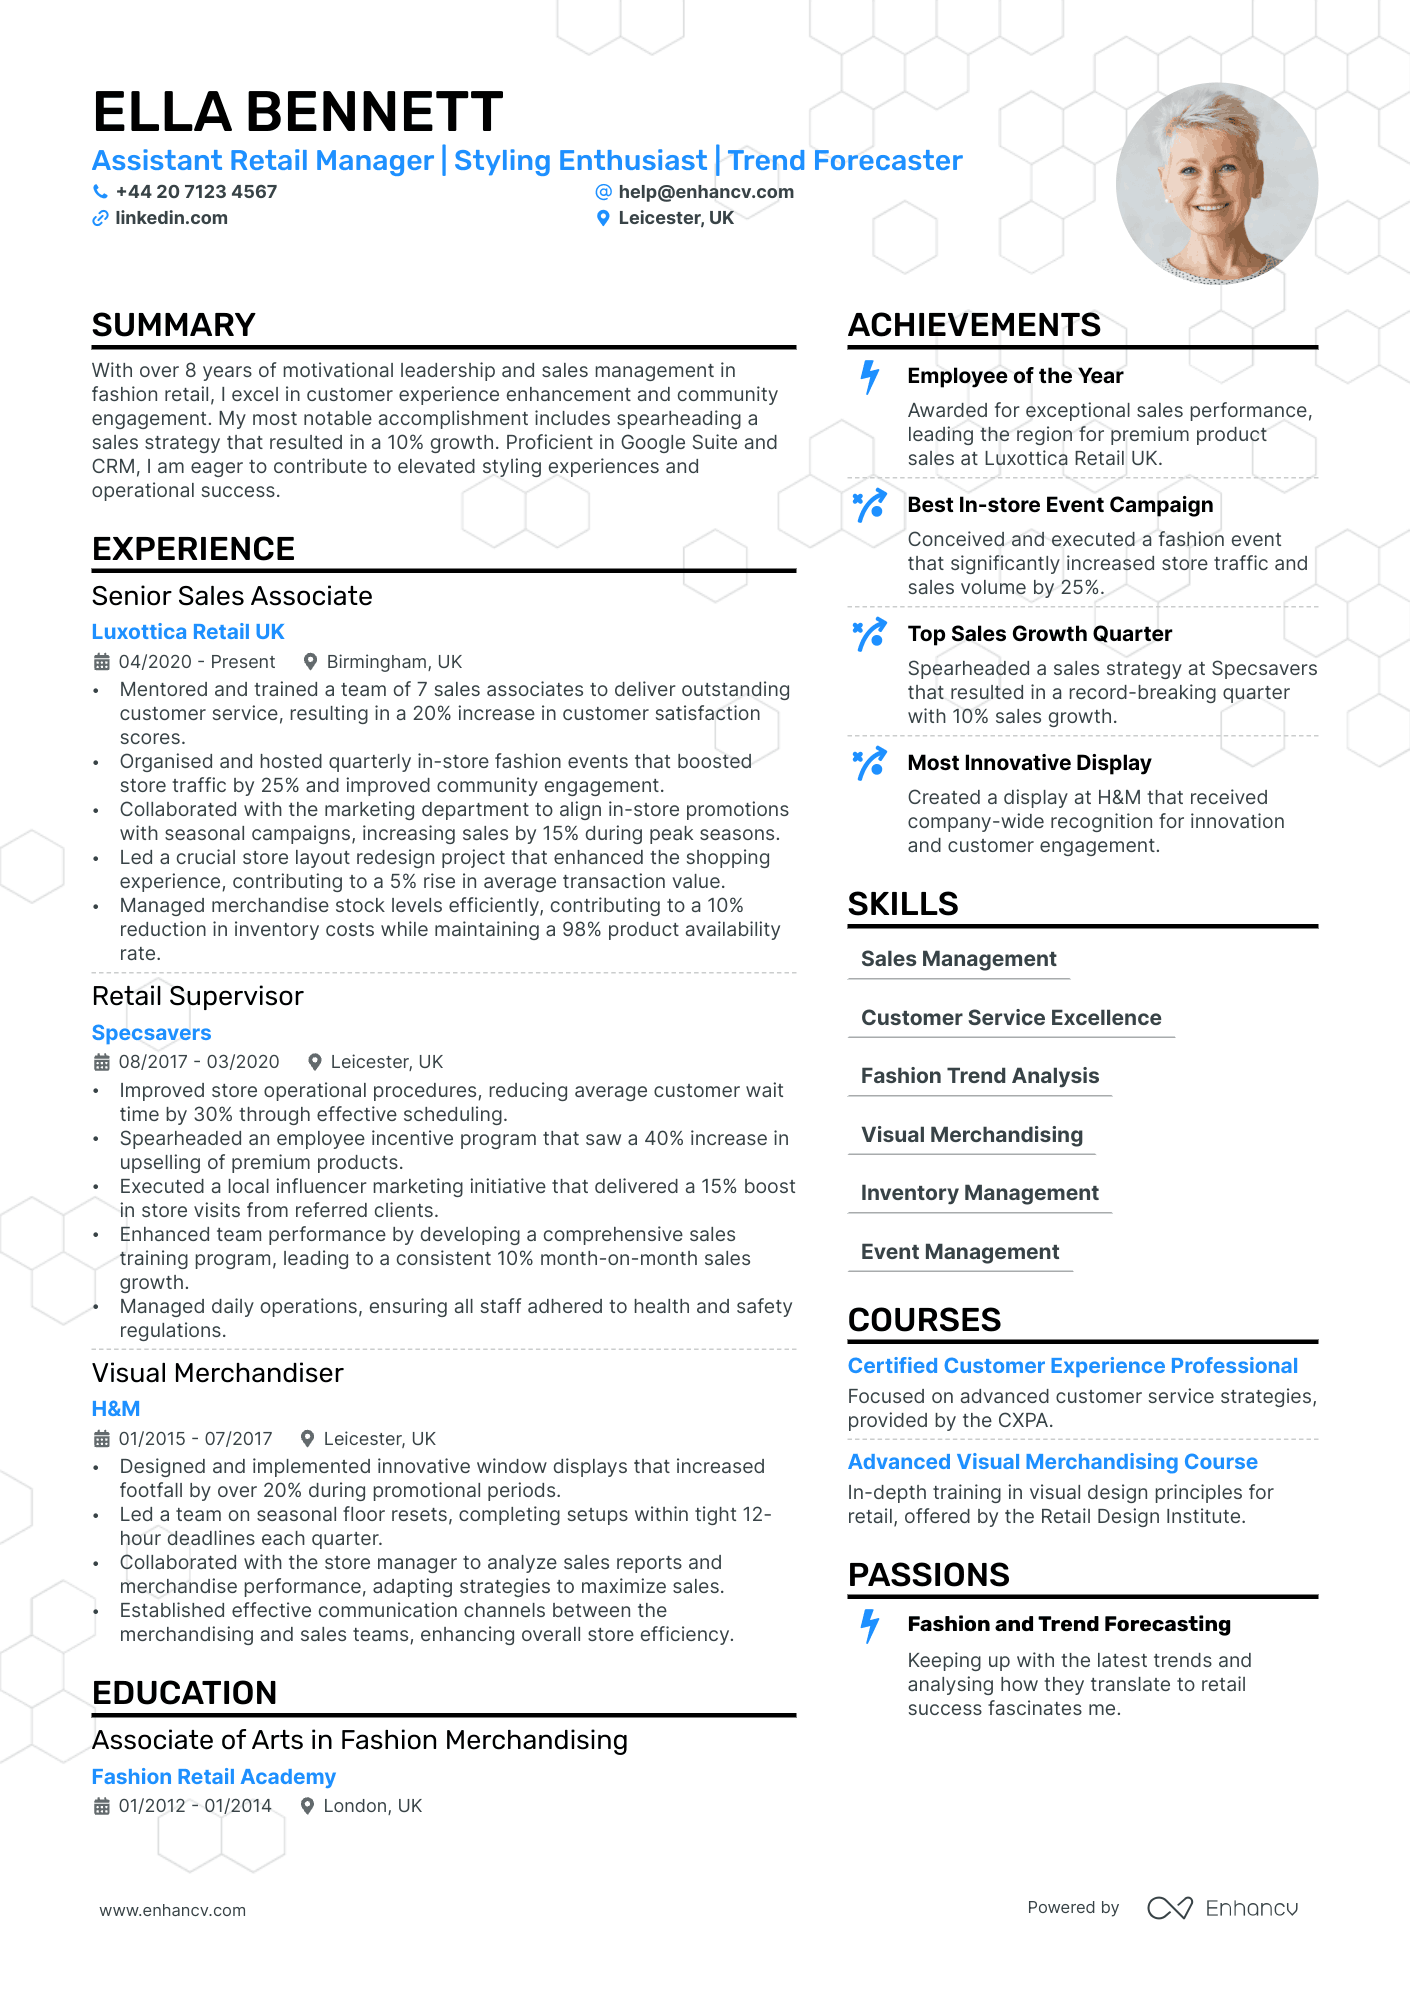 Retail Assistant Manager cv example